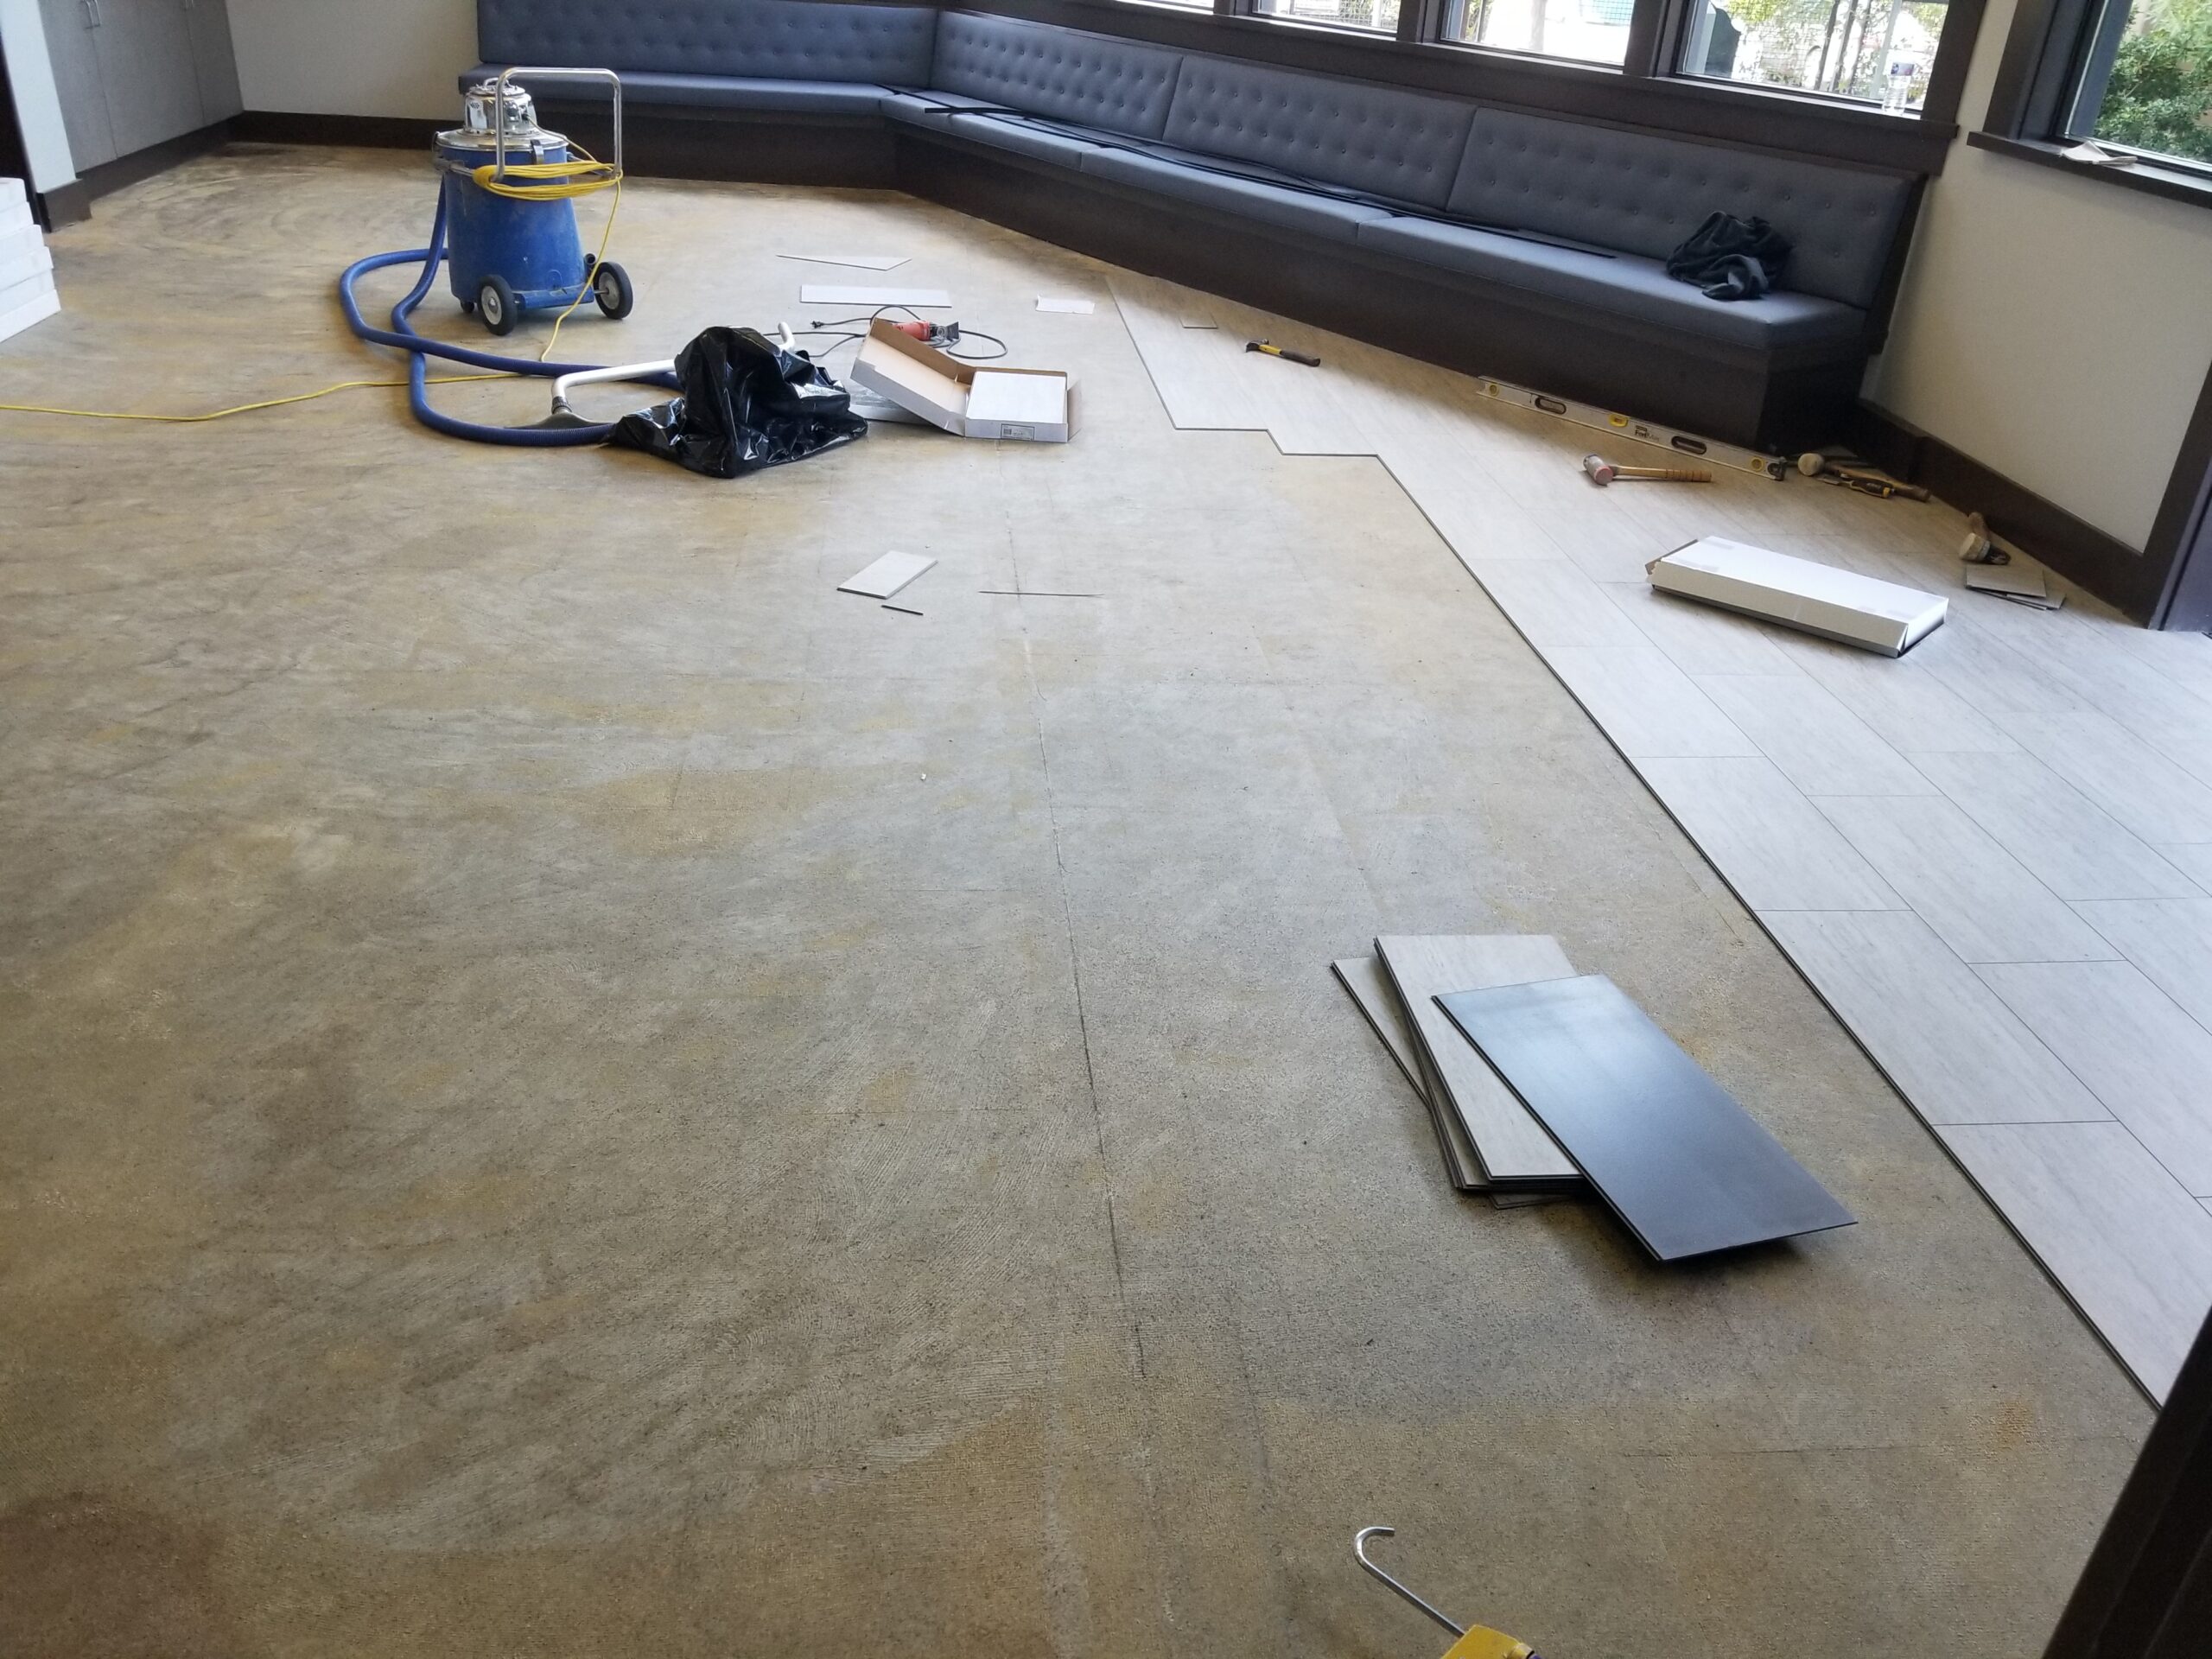 Palo Alto private club's cafe to get LVT after pulling worn carpeting.